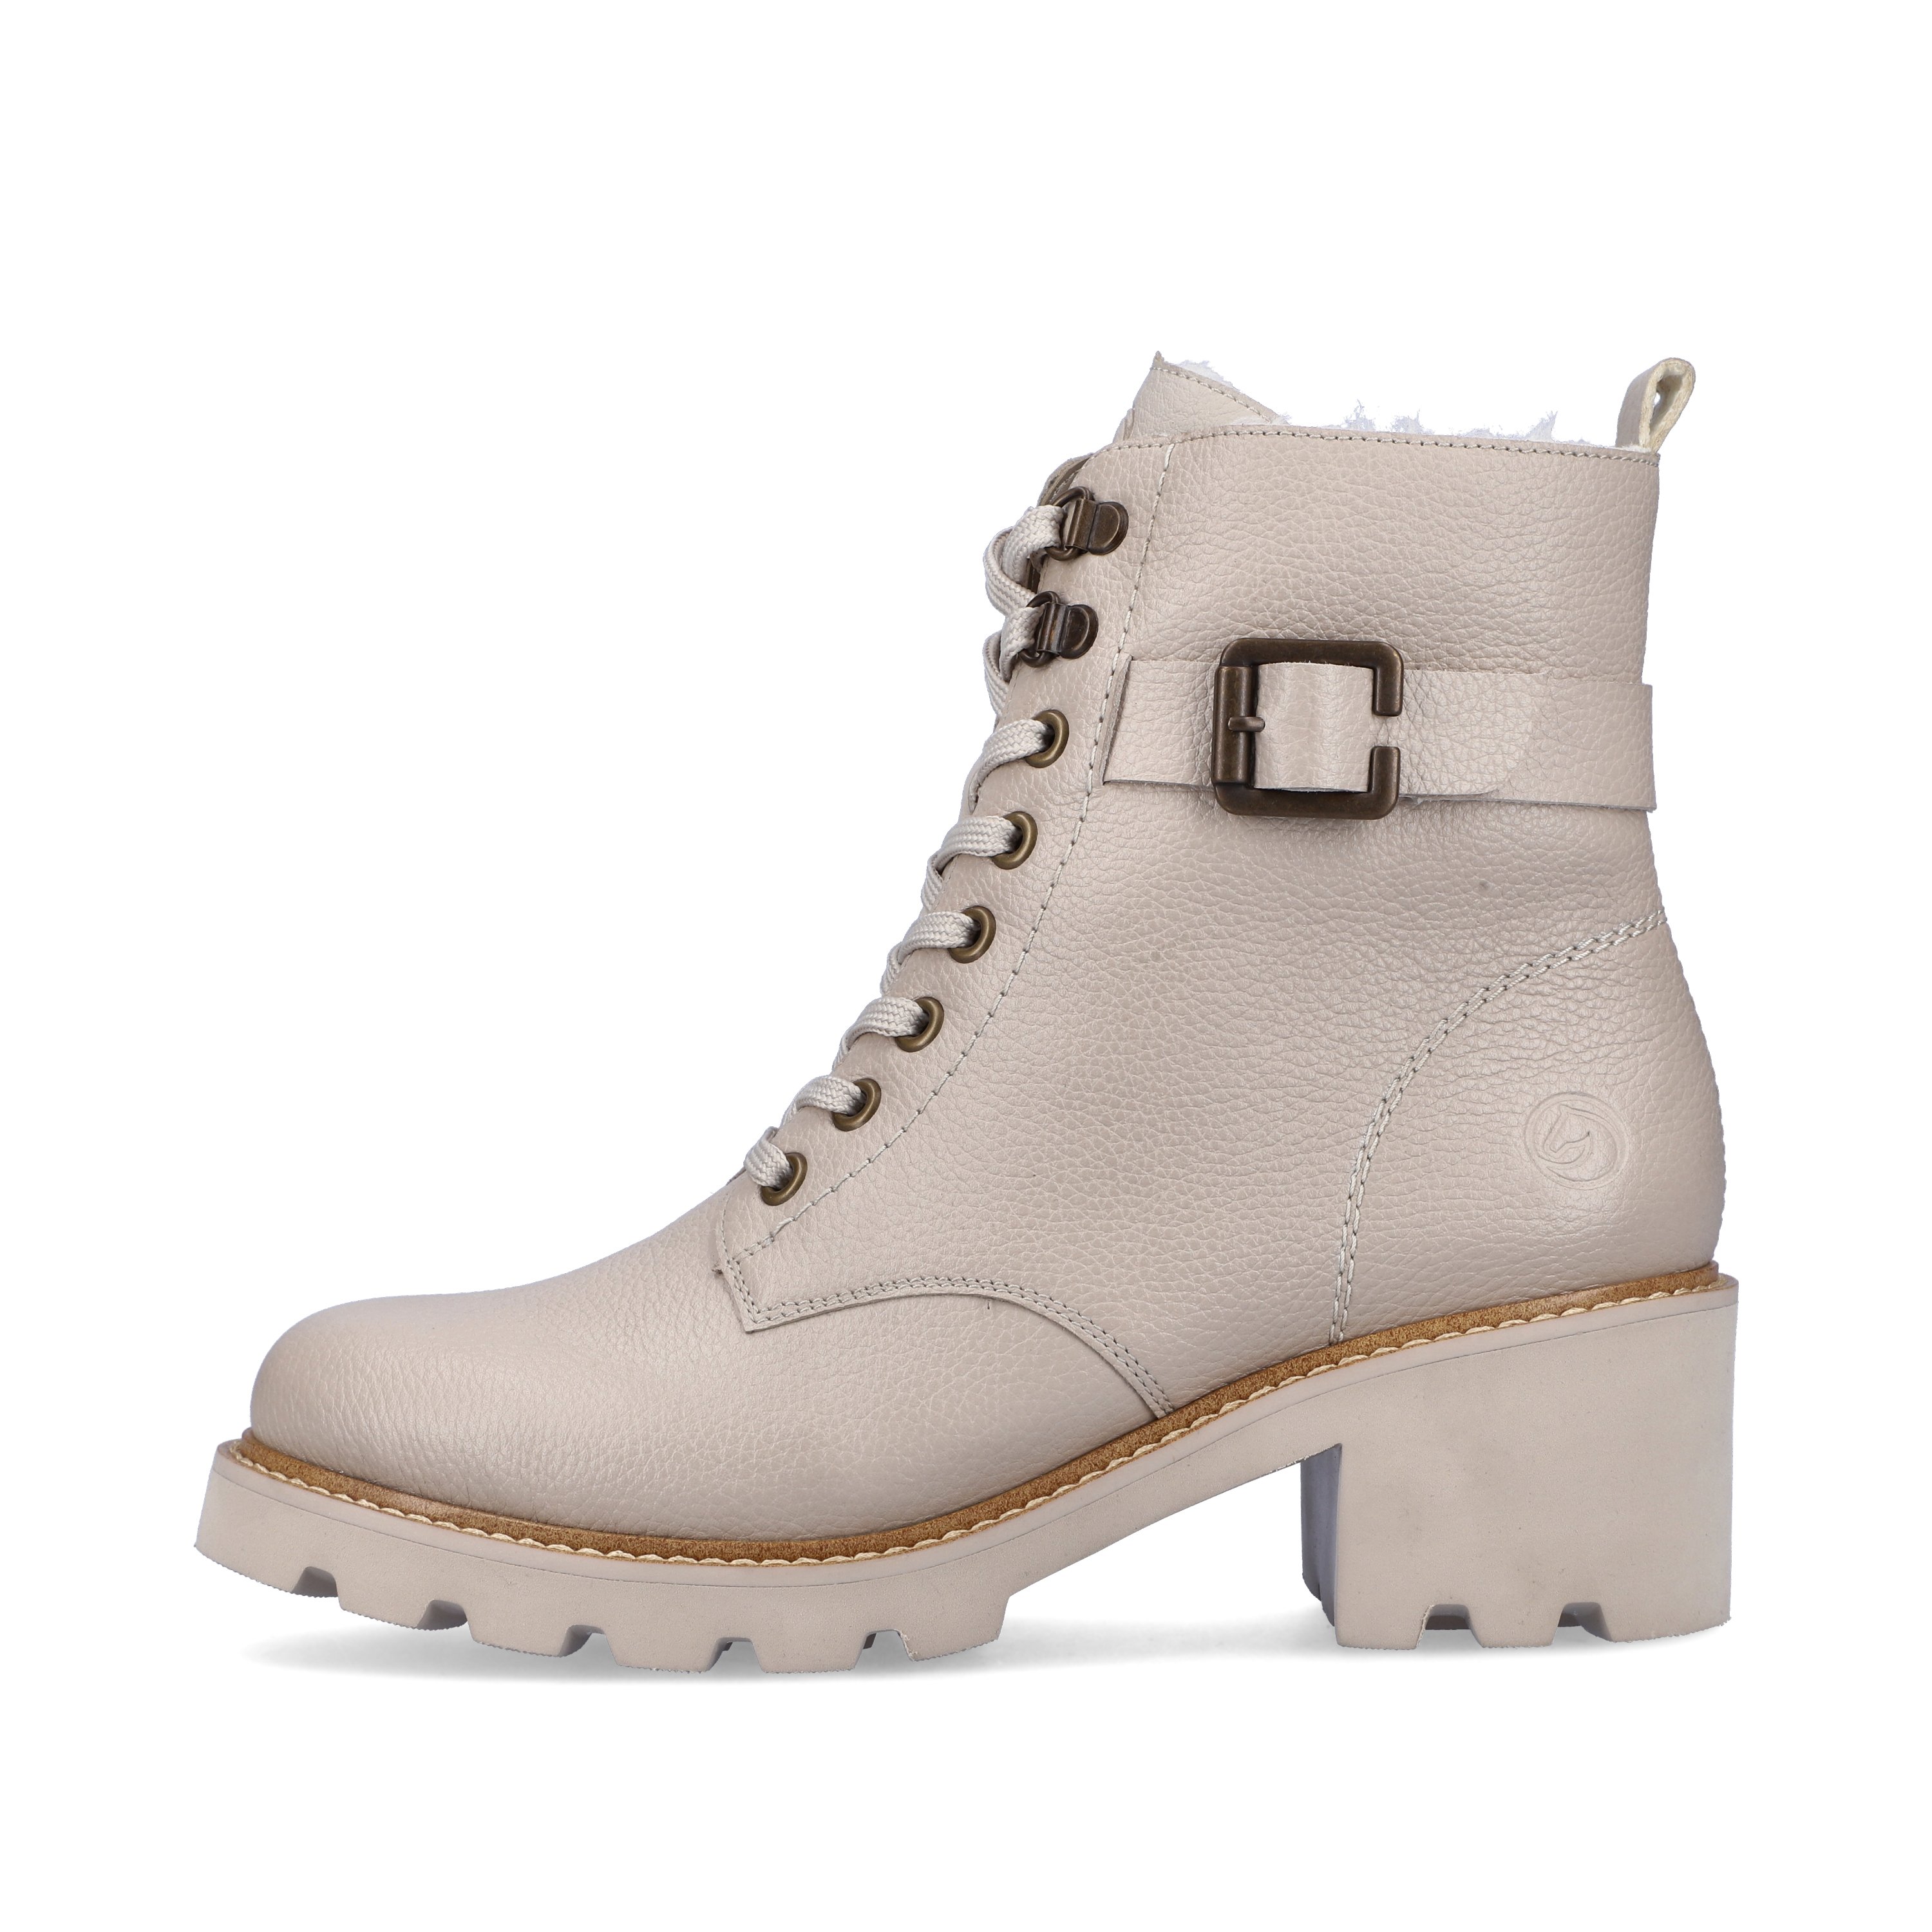 Light beige remonte women´s biker boots D0A74-60 with especially light sole. The outside of the shoe